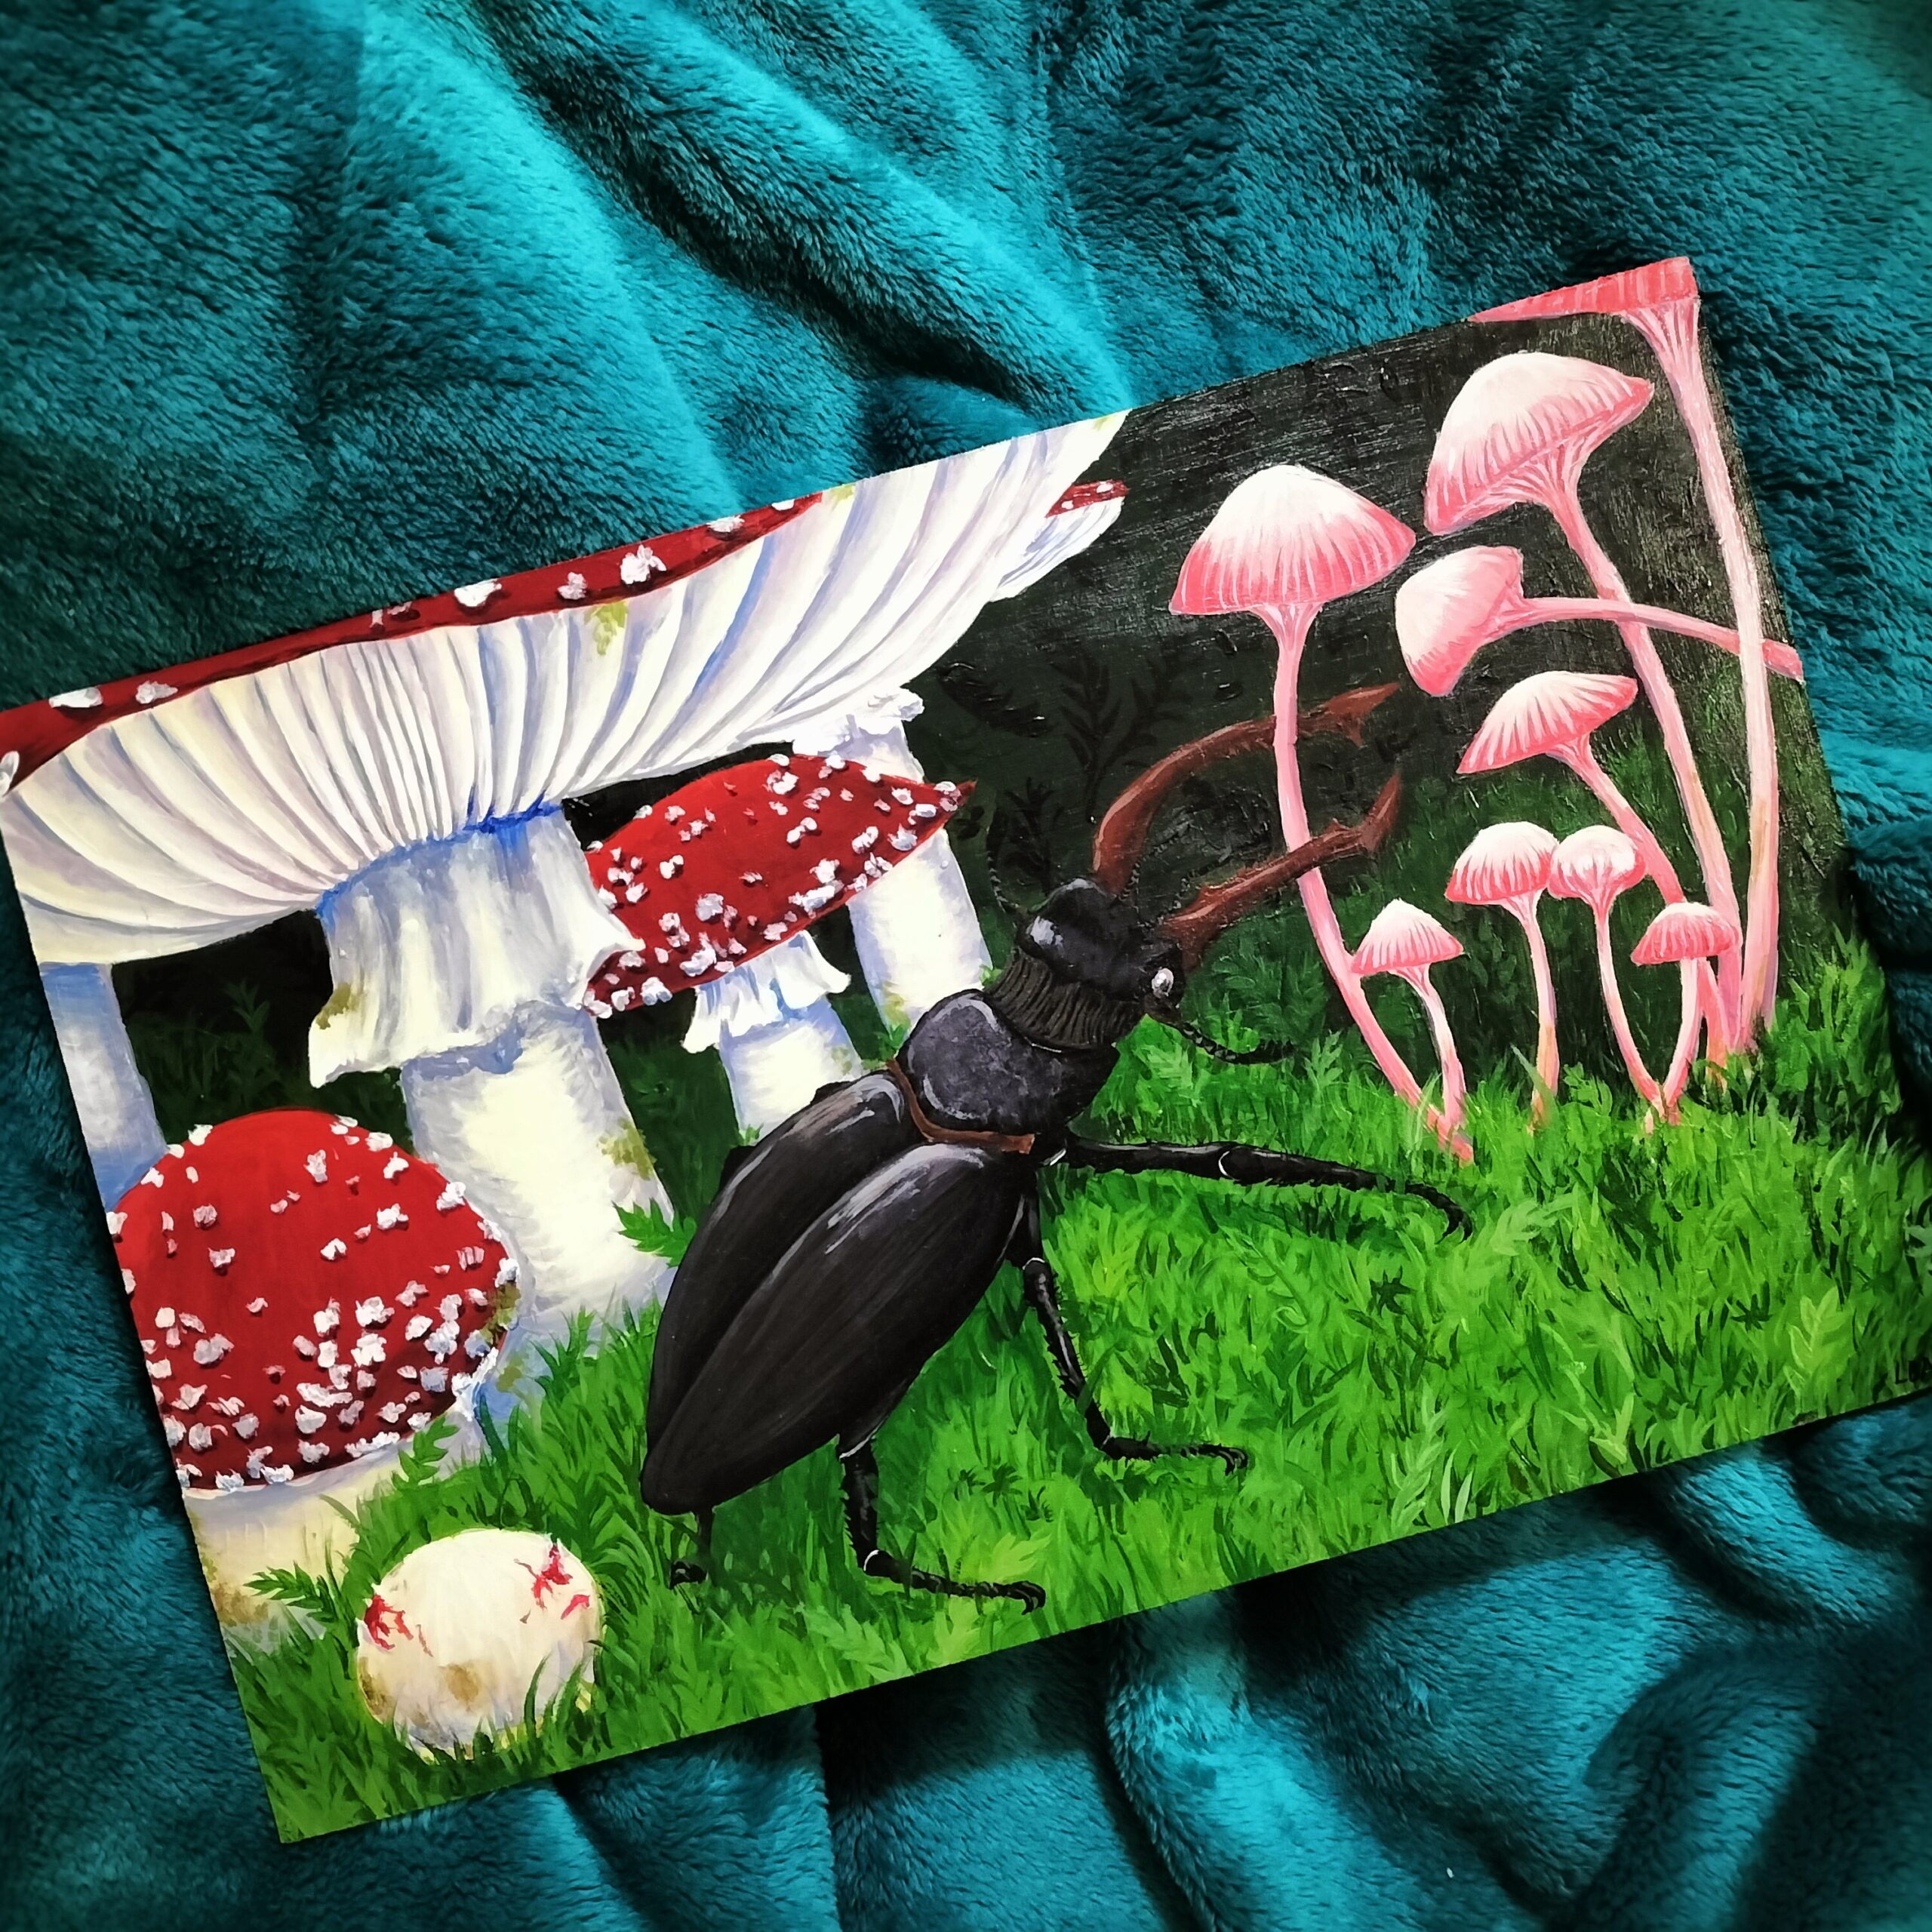 Image shows a mushroom and beetle for the Artist Profile Crafting Magical Worlds and Nature's Wonders with Laurinda Brooker Art Trails Tasmania